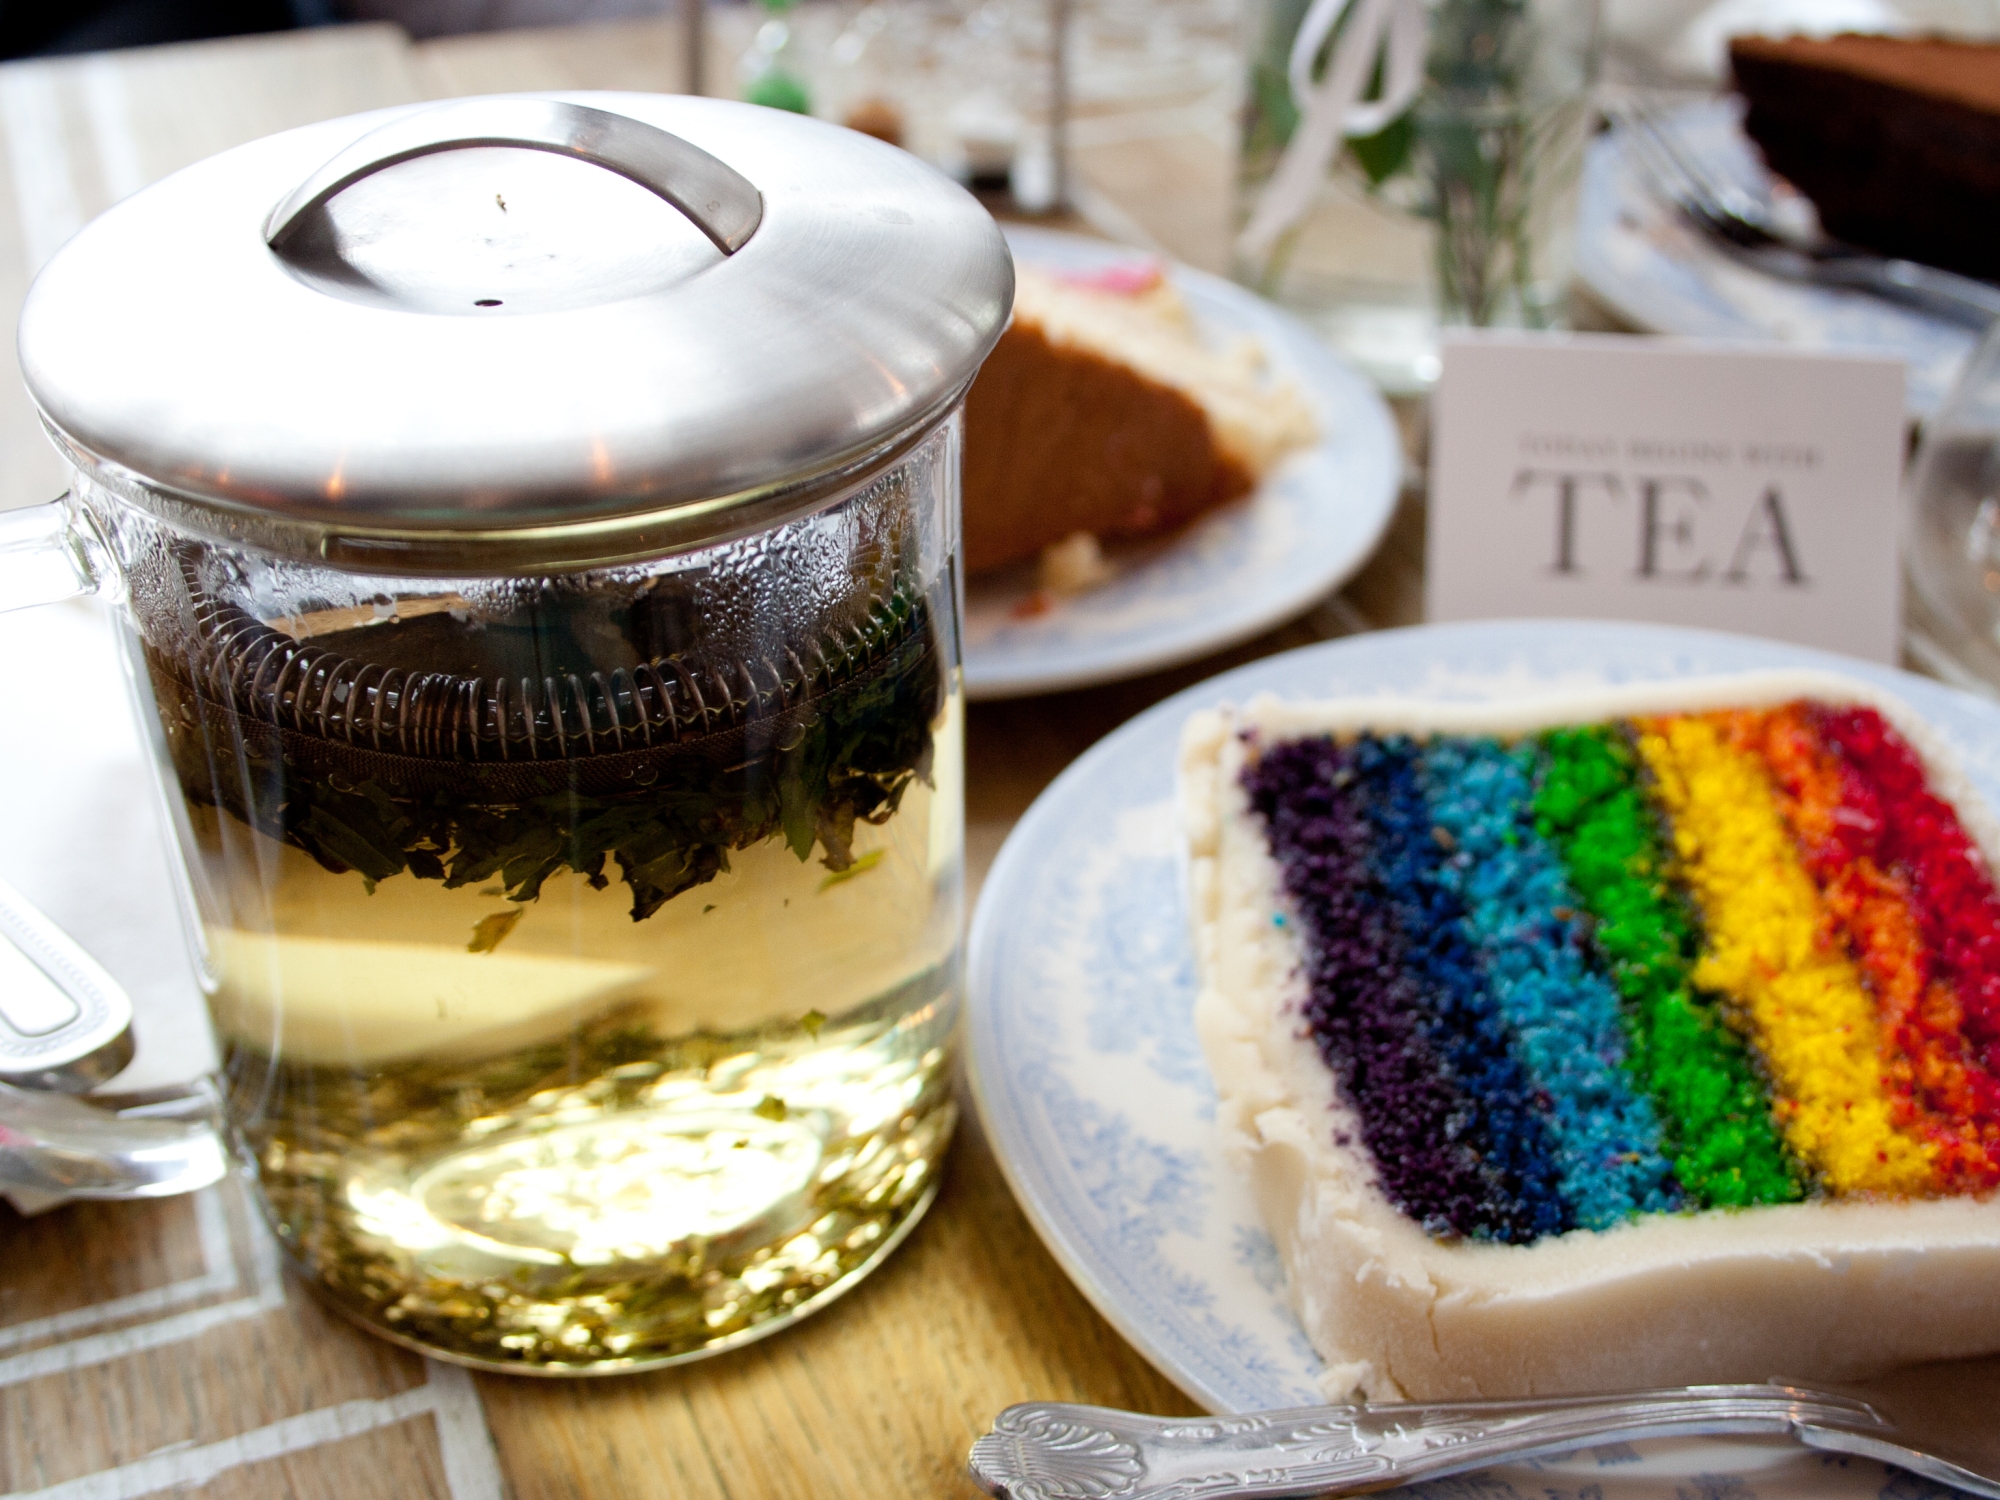 Peppermint tea and a rainbow cake in Proper Tea in Manchester